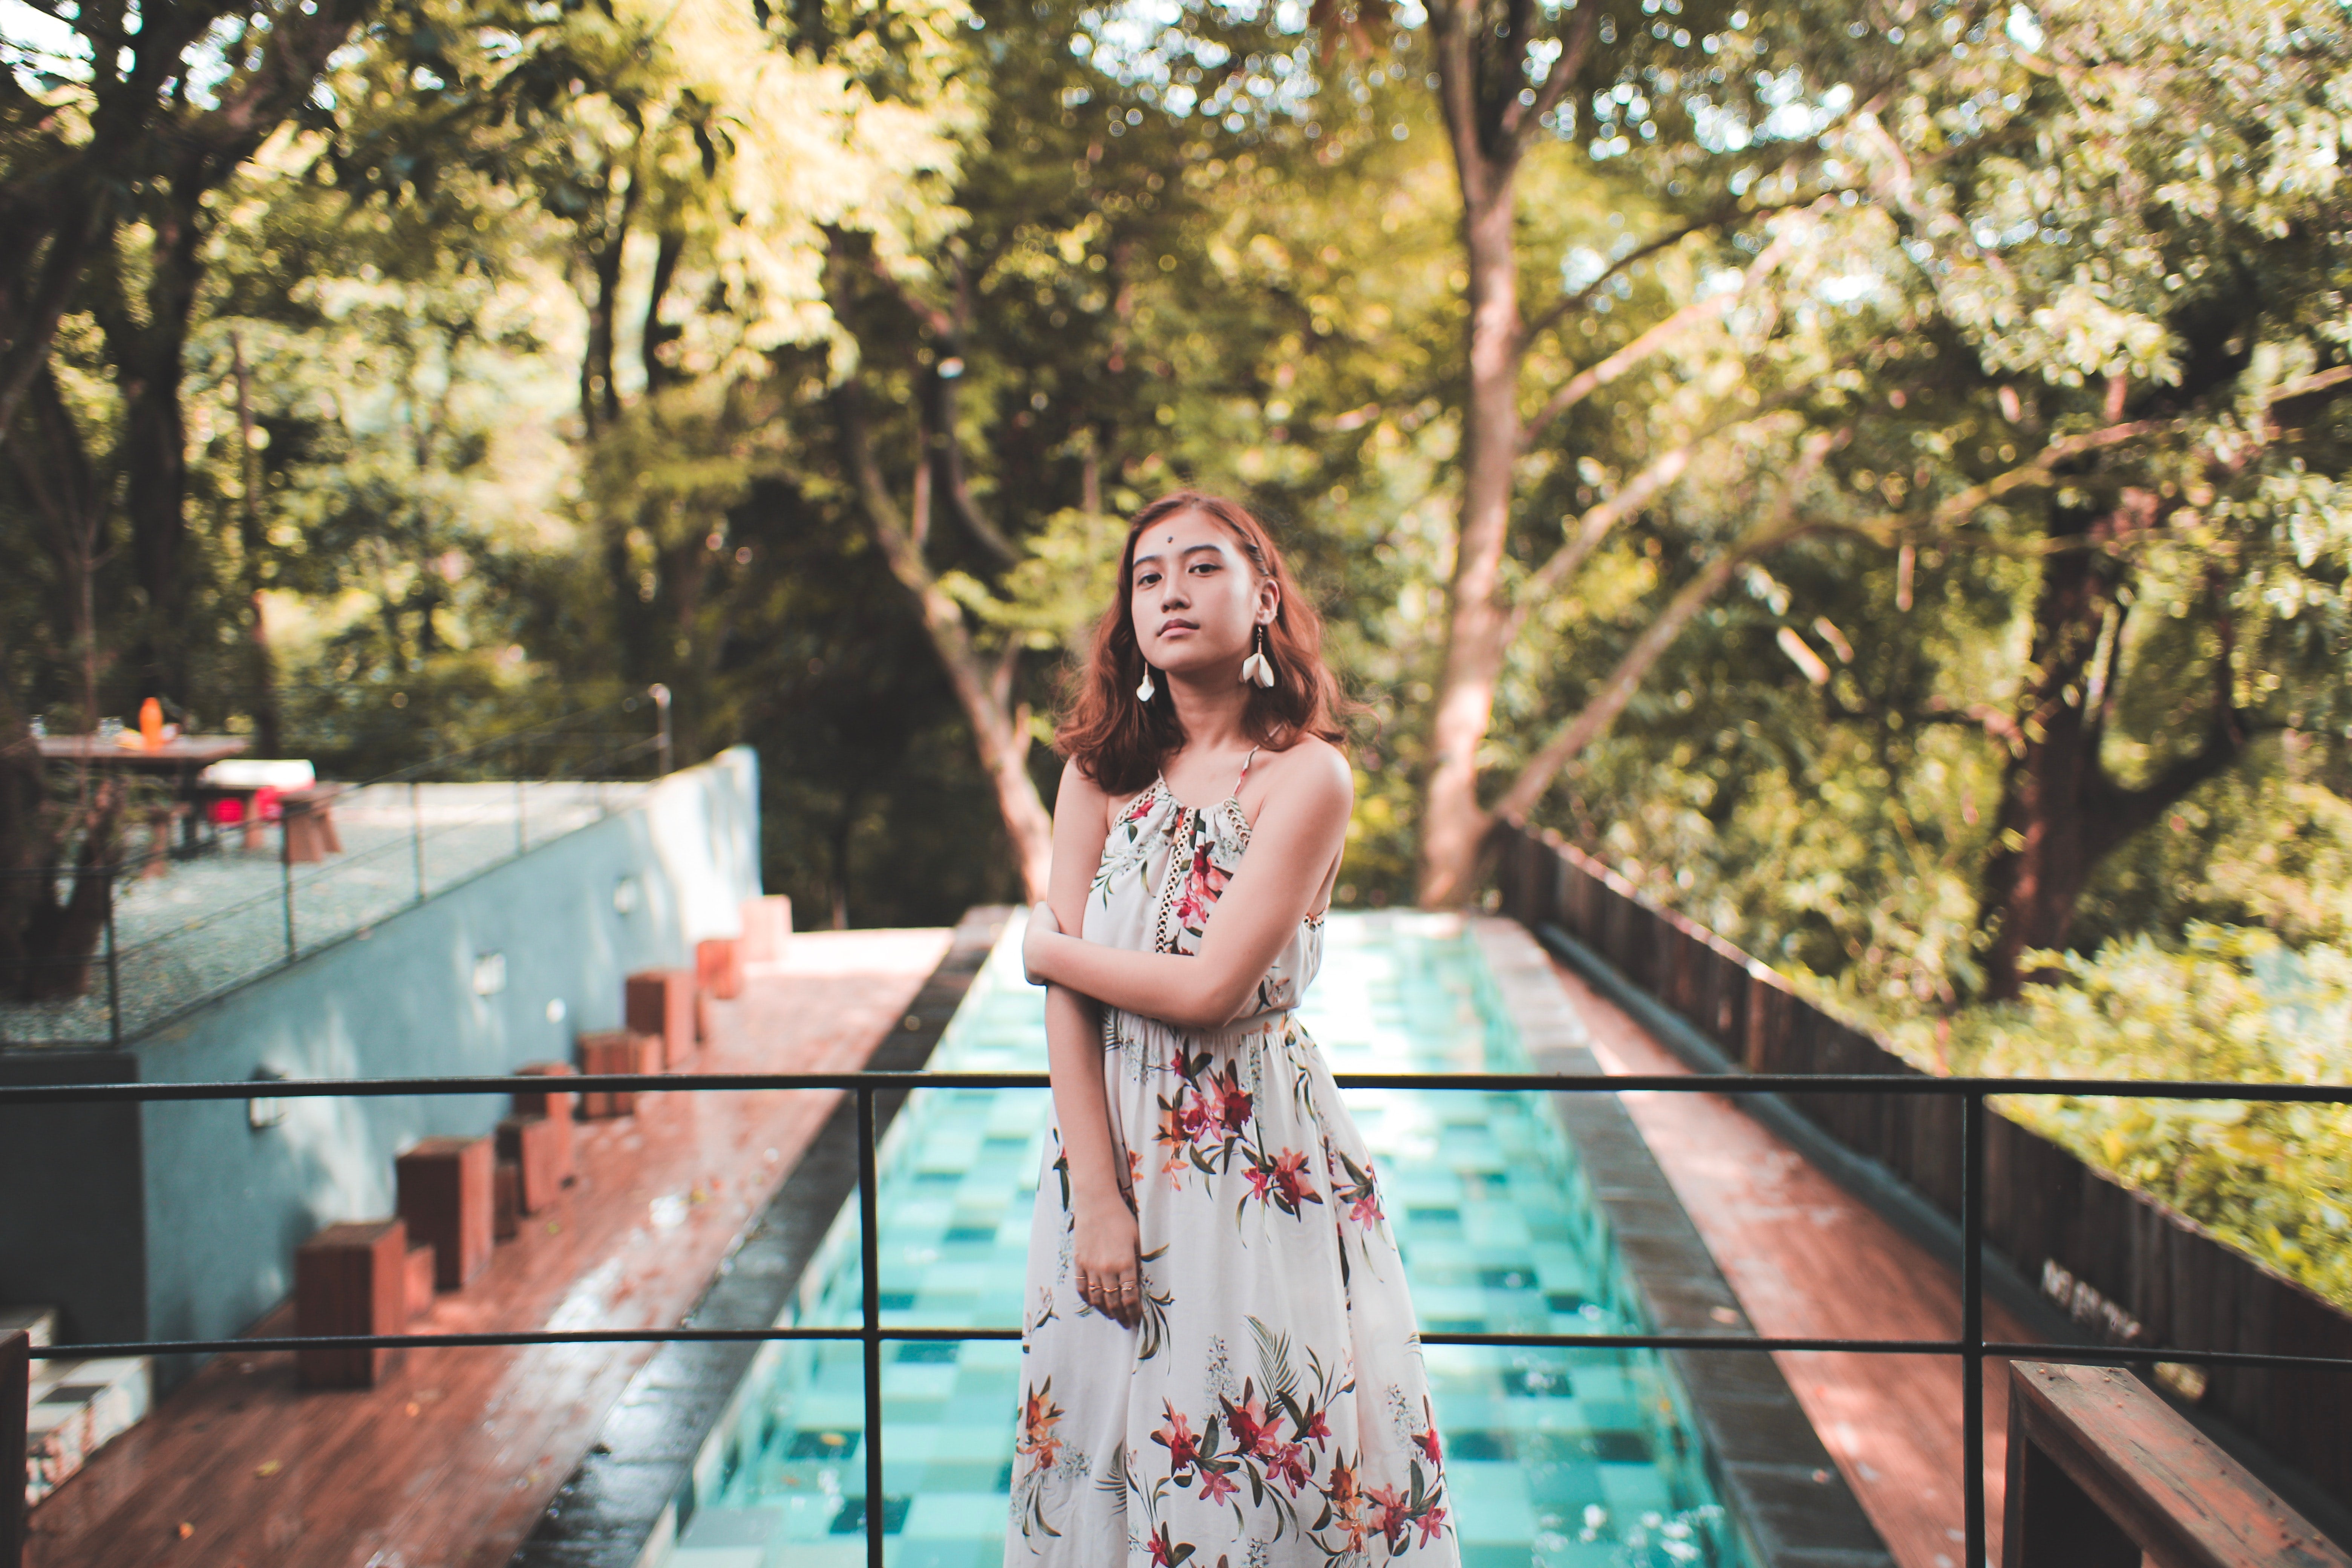 woman in a floral dress wearing statement earrings with a swimming pool in the background